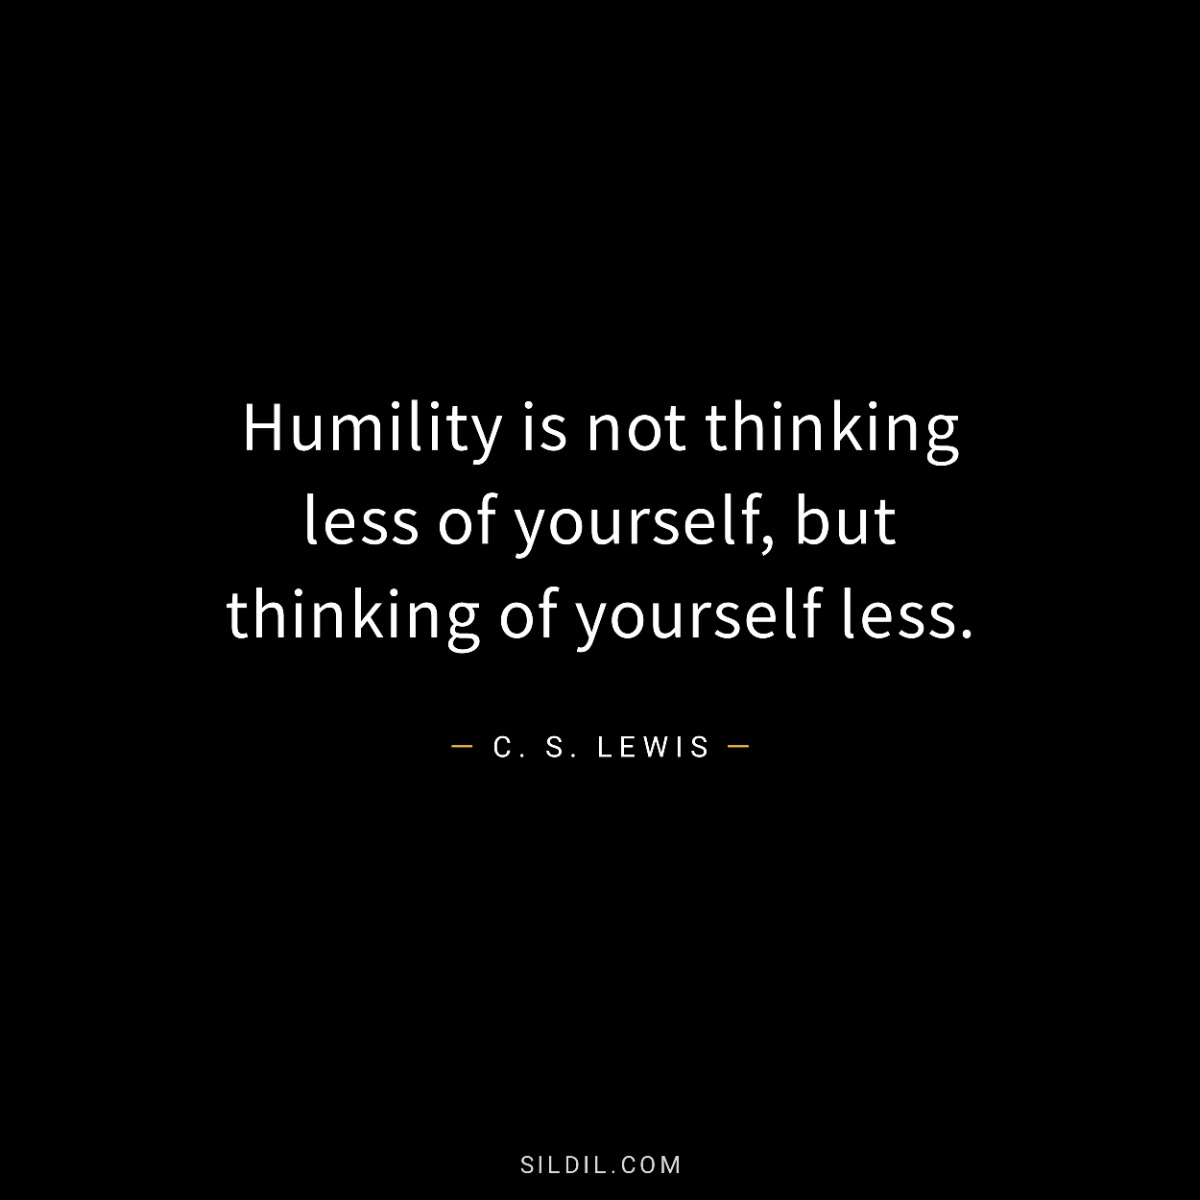 Humility is not thinking less of yourself, but thinking of yourself less.